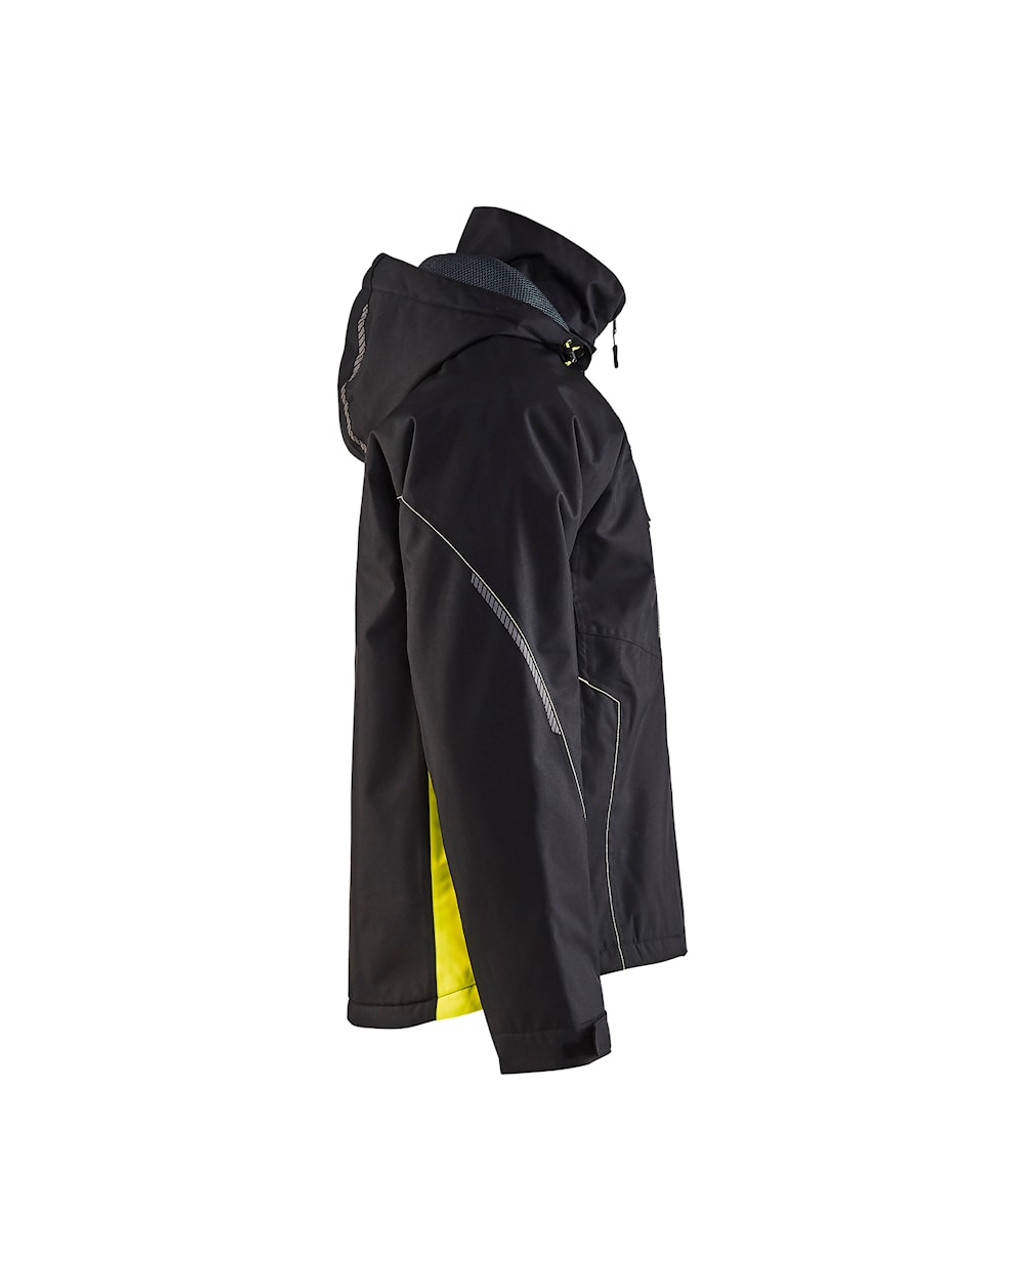 BLAKLADER Polyester Waterproof Black  Jacket  for Carpenters that have Full Zip  available in Australia and New Zealand